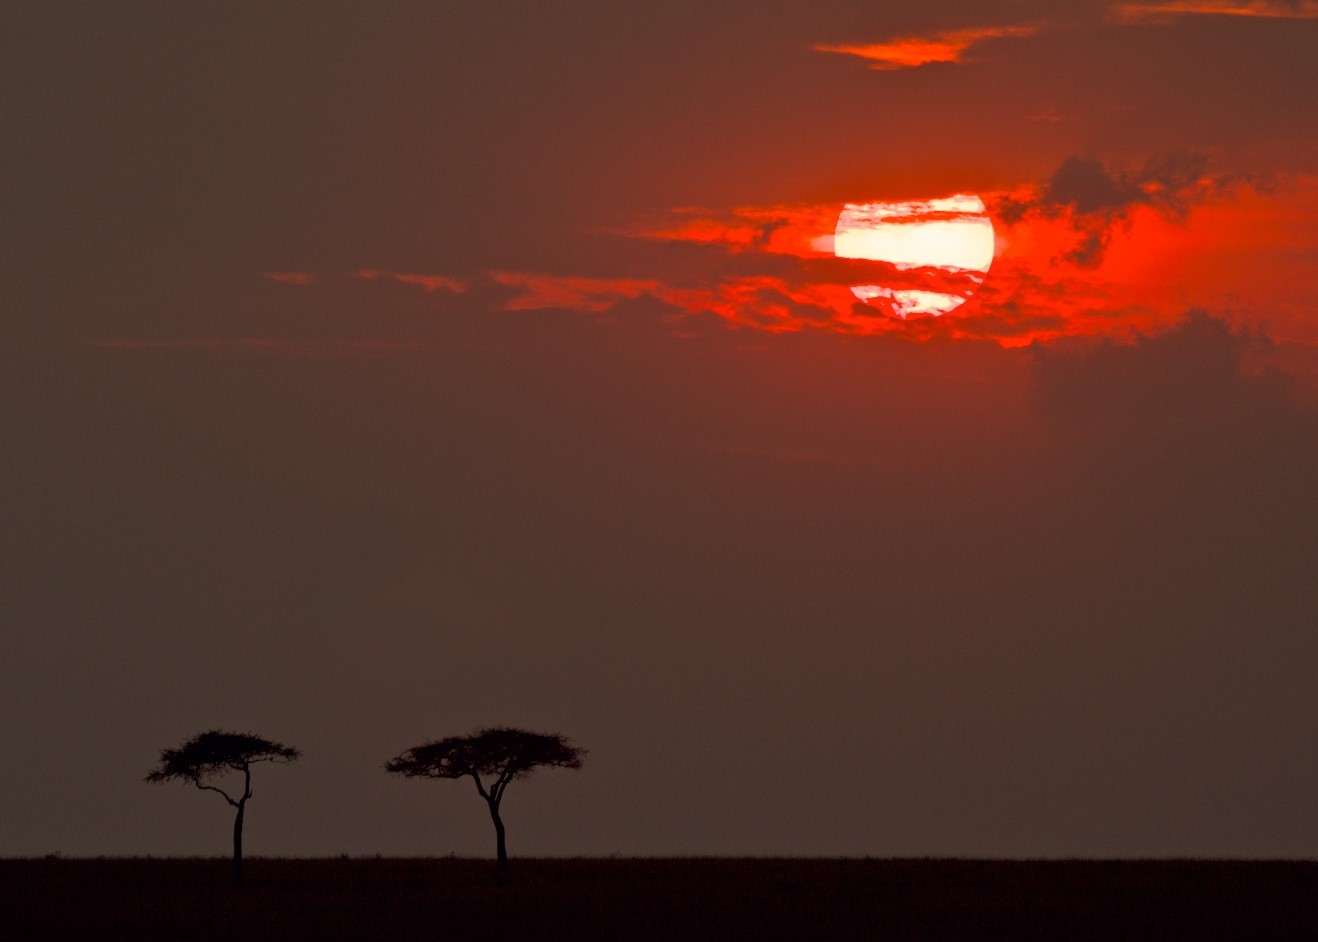 a red sun sets on Kenya's savanna with acacia trees in the foreground